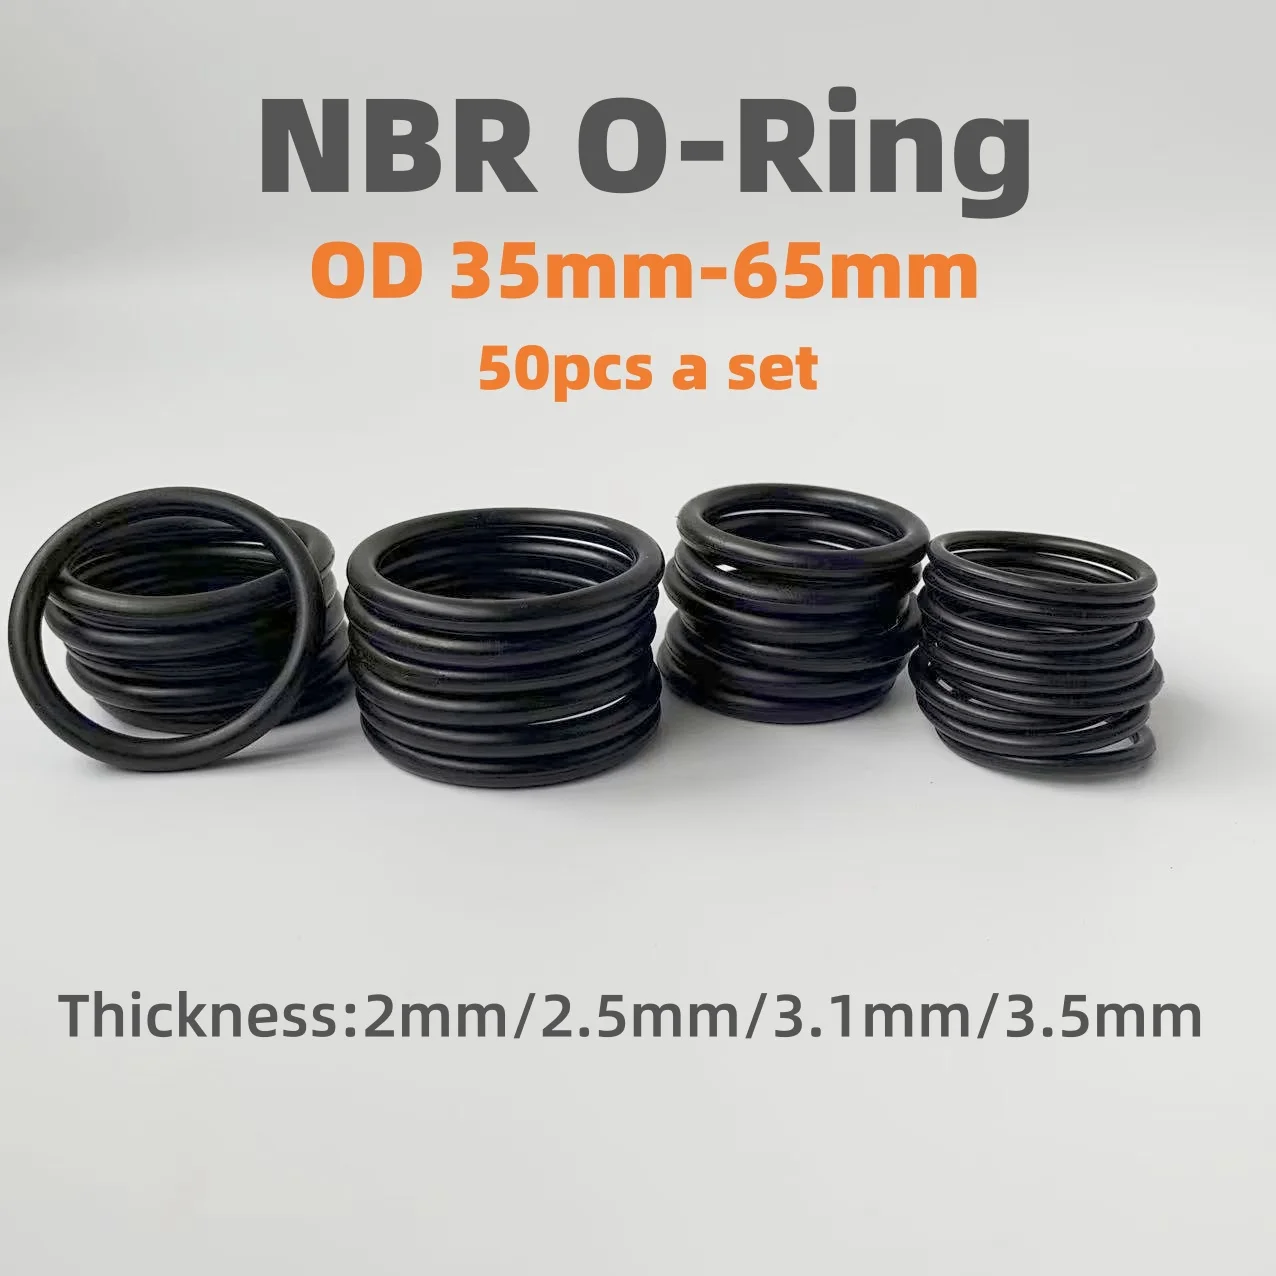 

50 NBR Black O Ring Gasket Rubber Gaskets Seal Ring Nitrile Rubber High Pressure O-Rings NBR Corrosion Oil Resist Sealing Washer